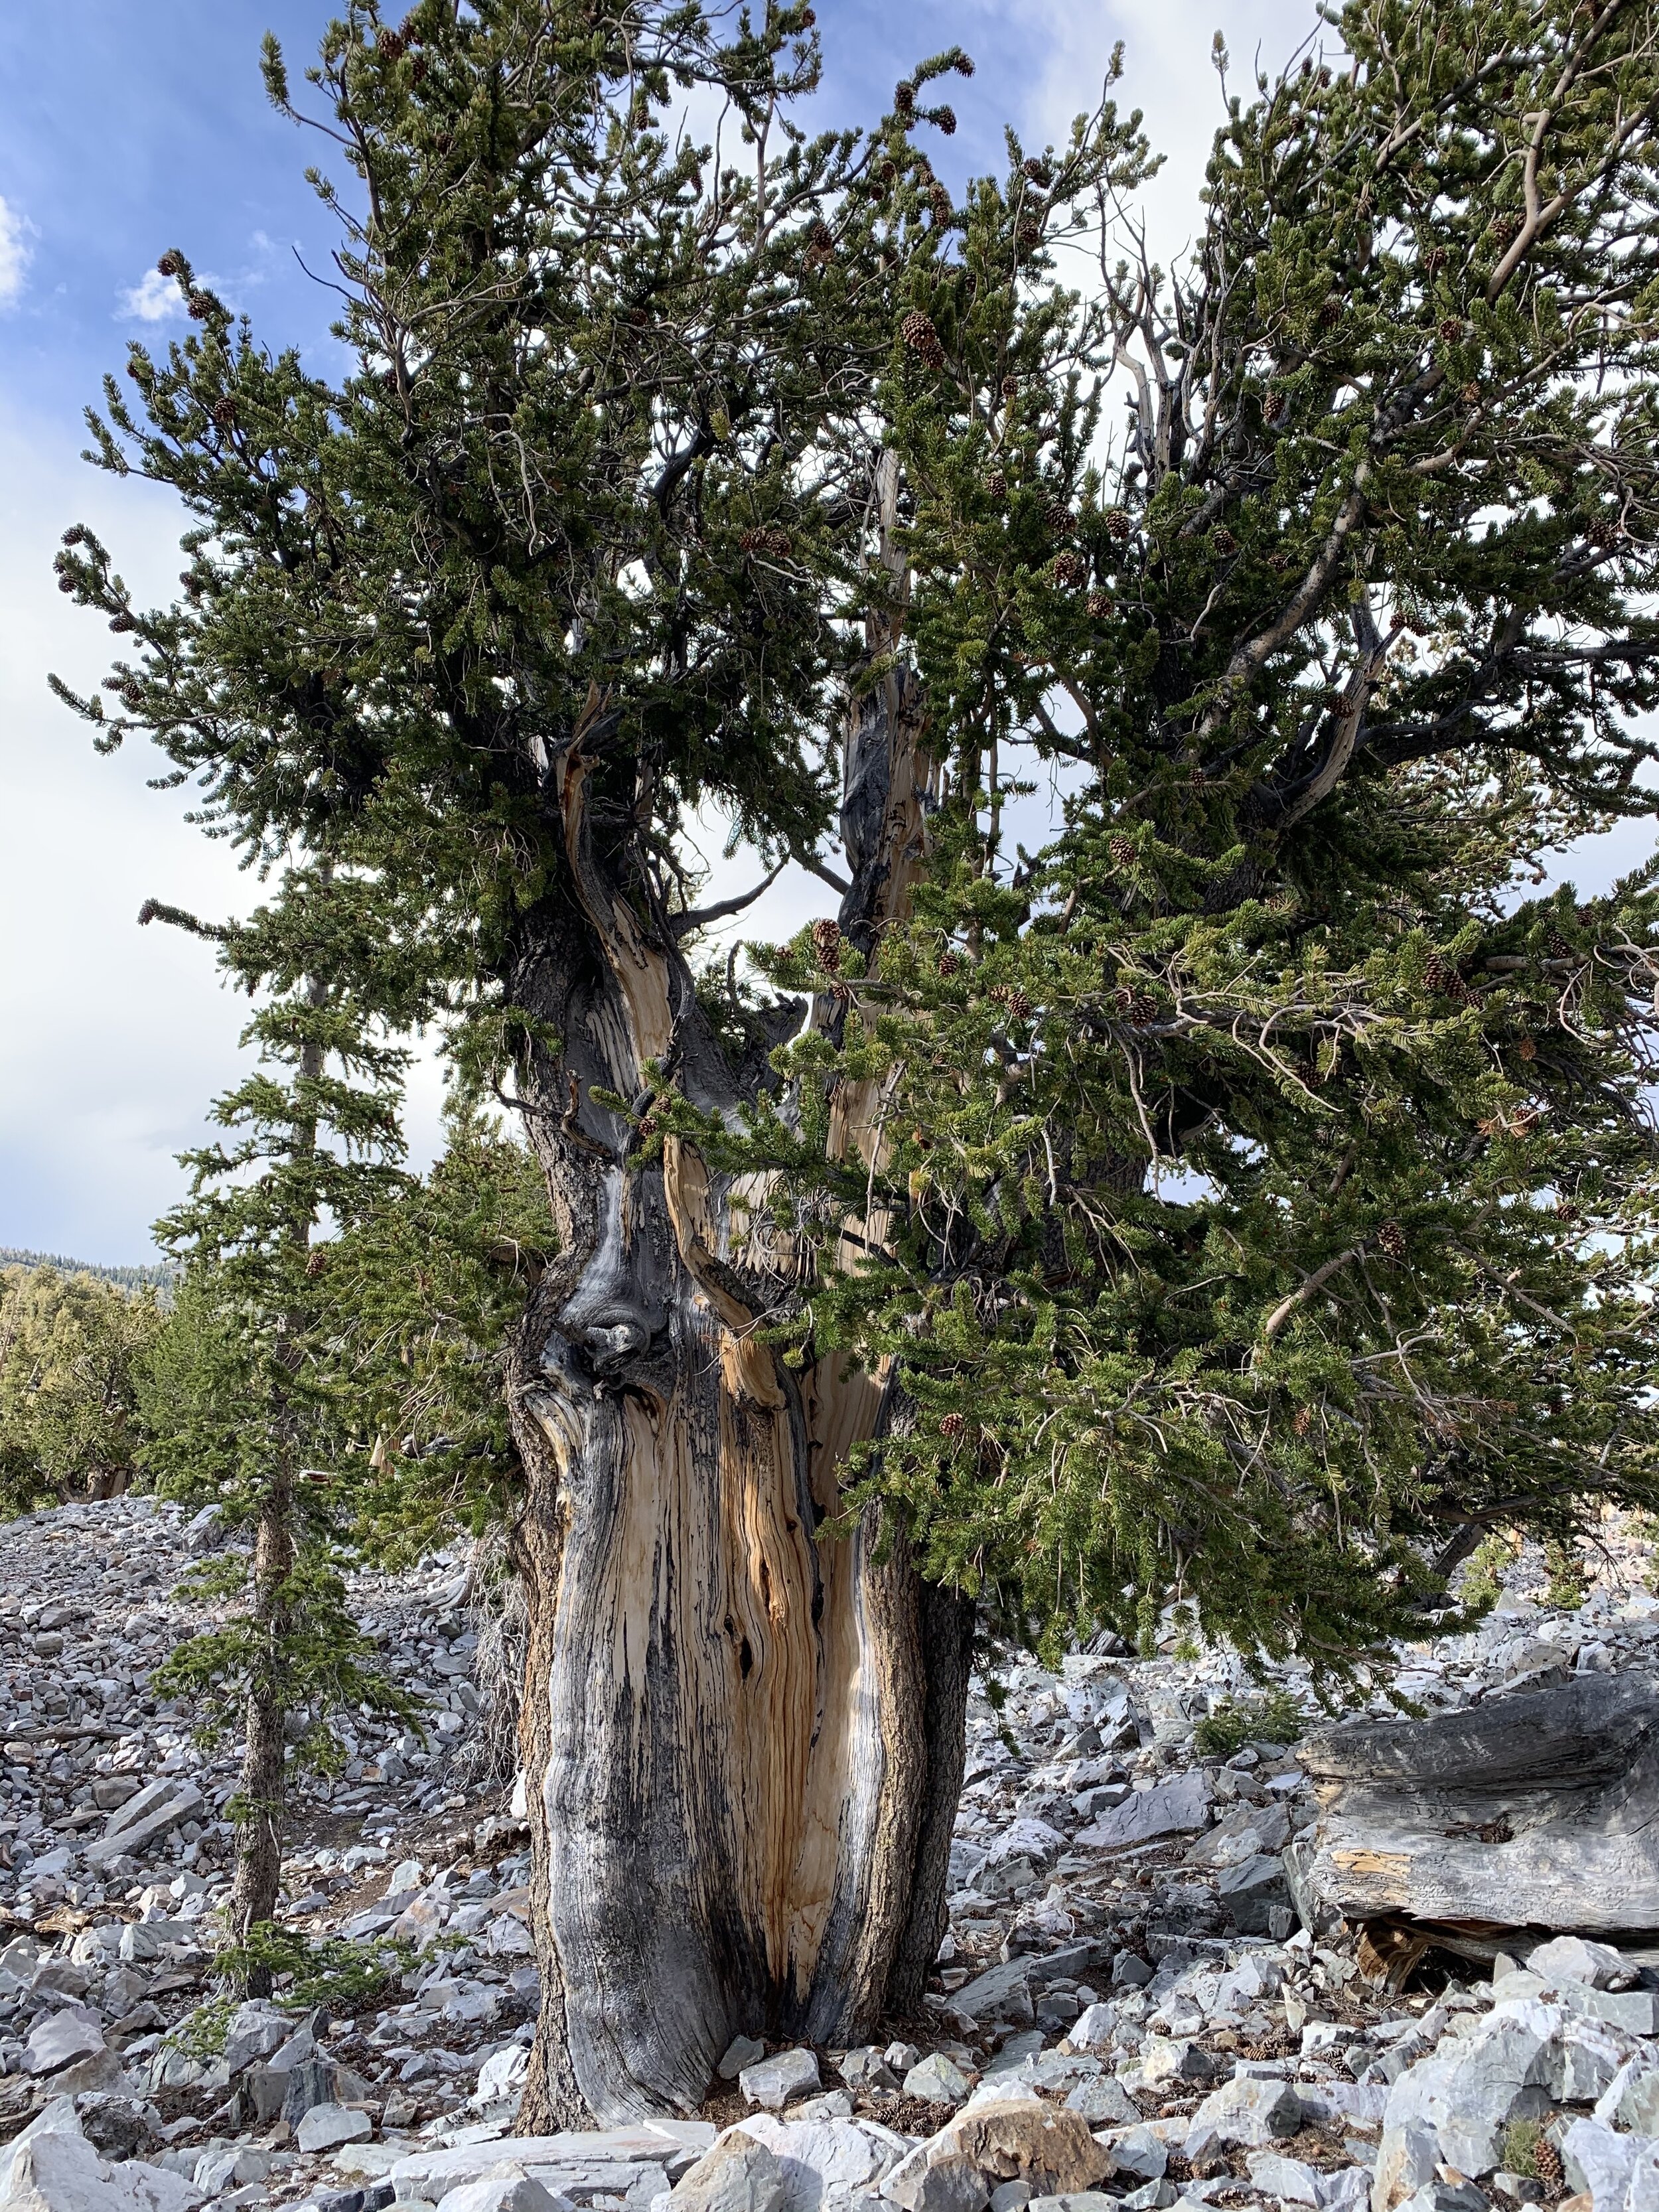  Bristlecones are found in extremely rugged sites in the high mountains of the southwest and grow to be so old because of their ability to adapt to harsh environments. They often live in isolation where other types of trees cannot survive. 